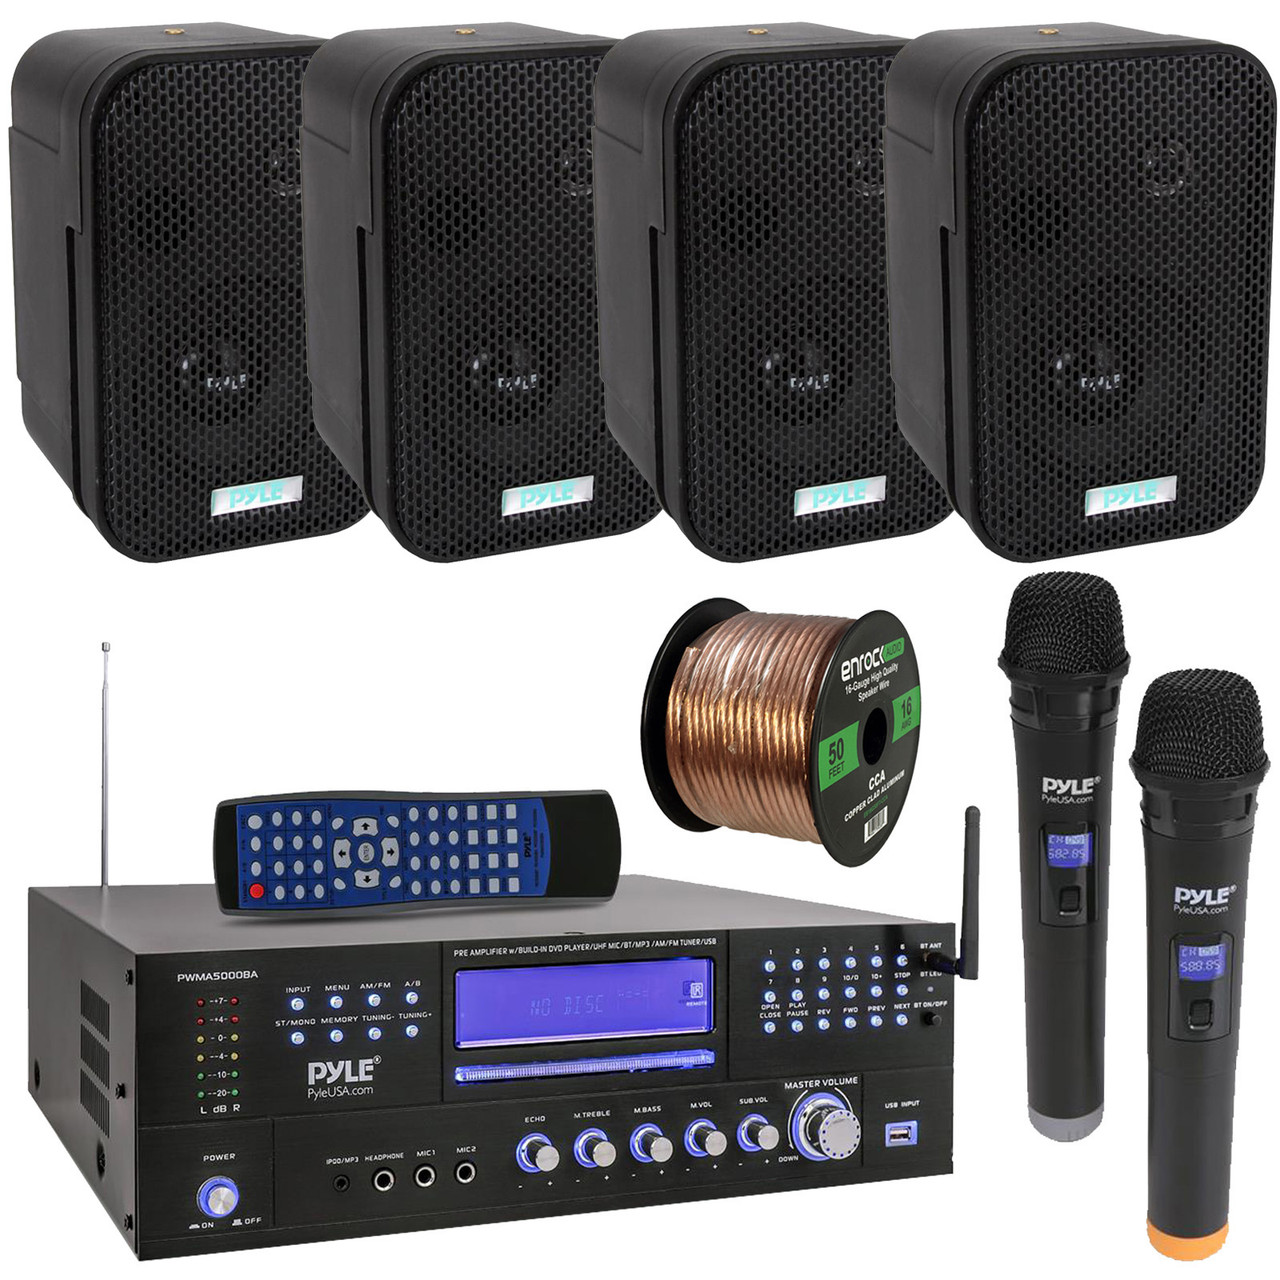 Pyle 4-Channel Wireless BT Home Theater Preamplifier, Multimedia Disc, MP3/ USB Reader, AM/FM Radio